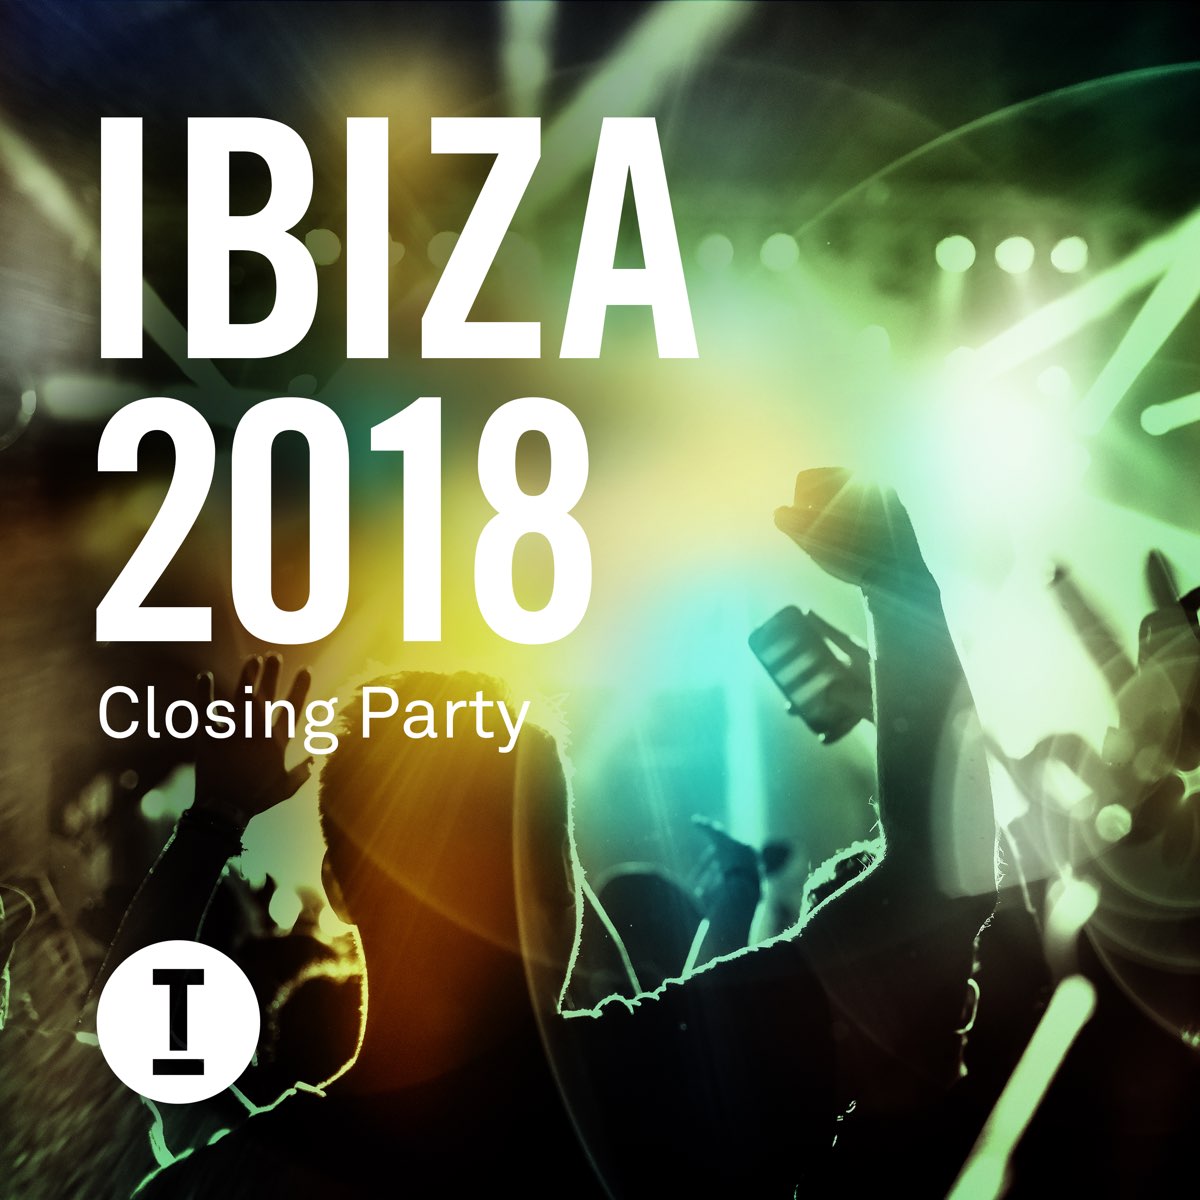 ‎Ibiza 2018 Closing Party by Various Artists on Apple Music